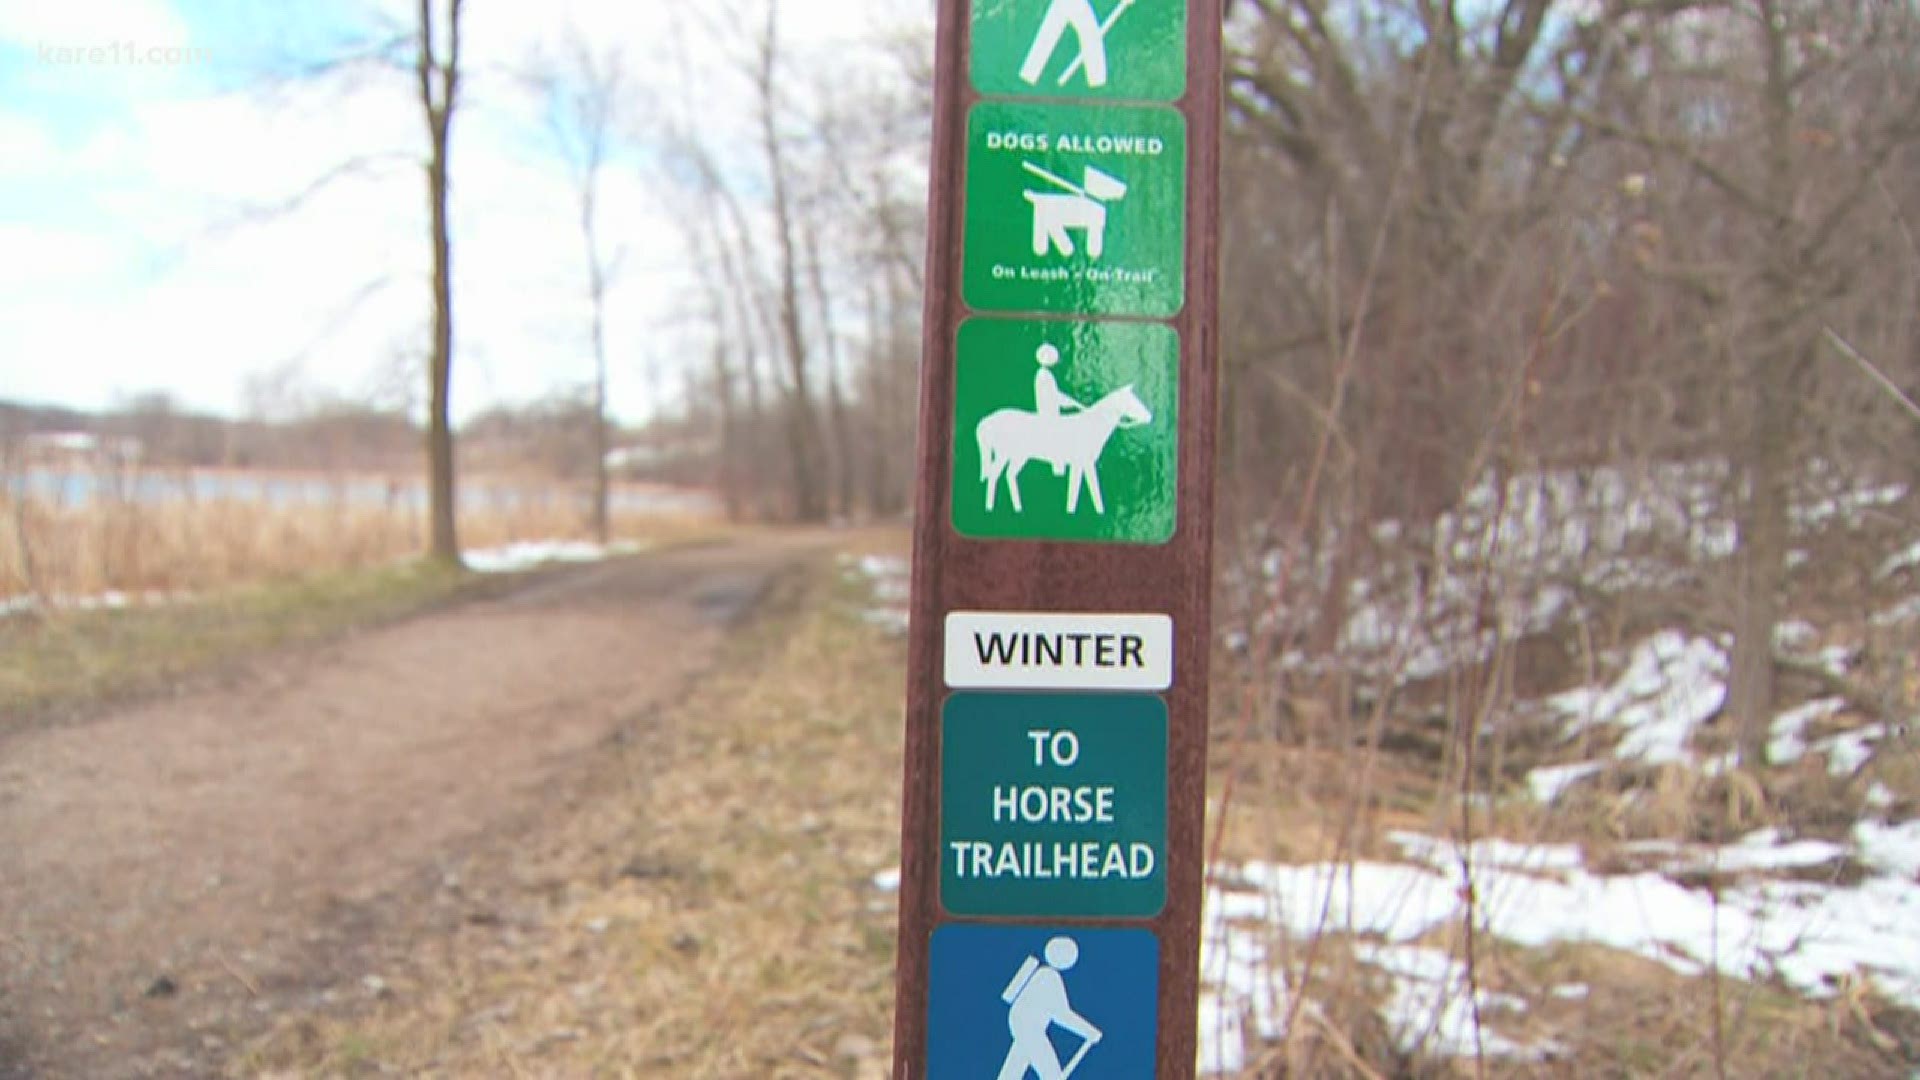 Parks and trails in the Three Rivers Park District are still open during the coronavirus pandemic.